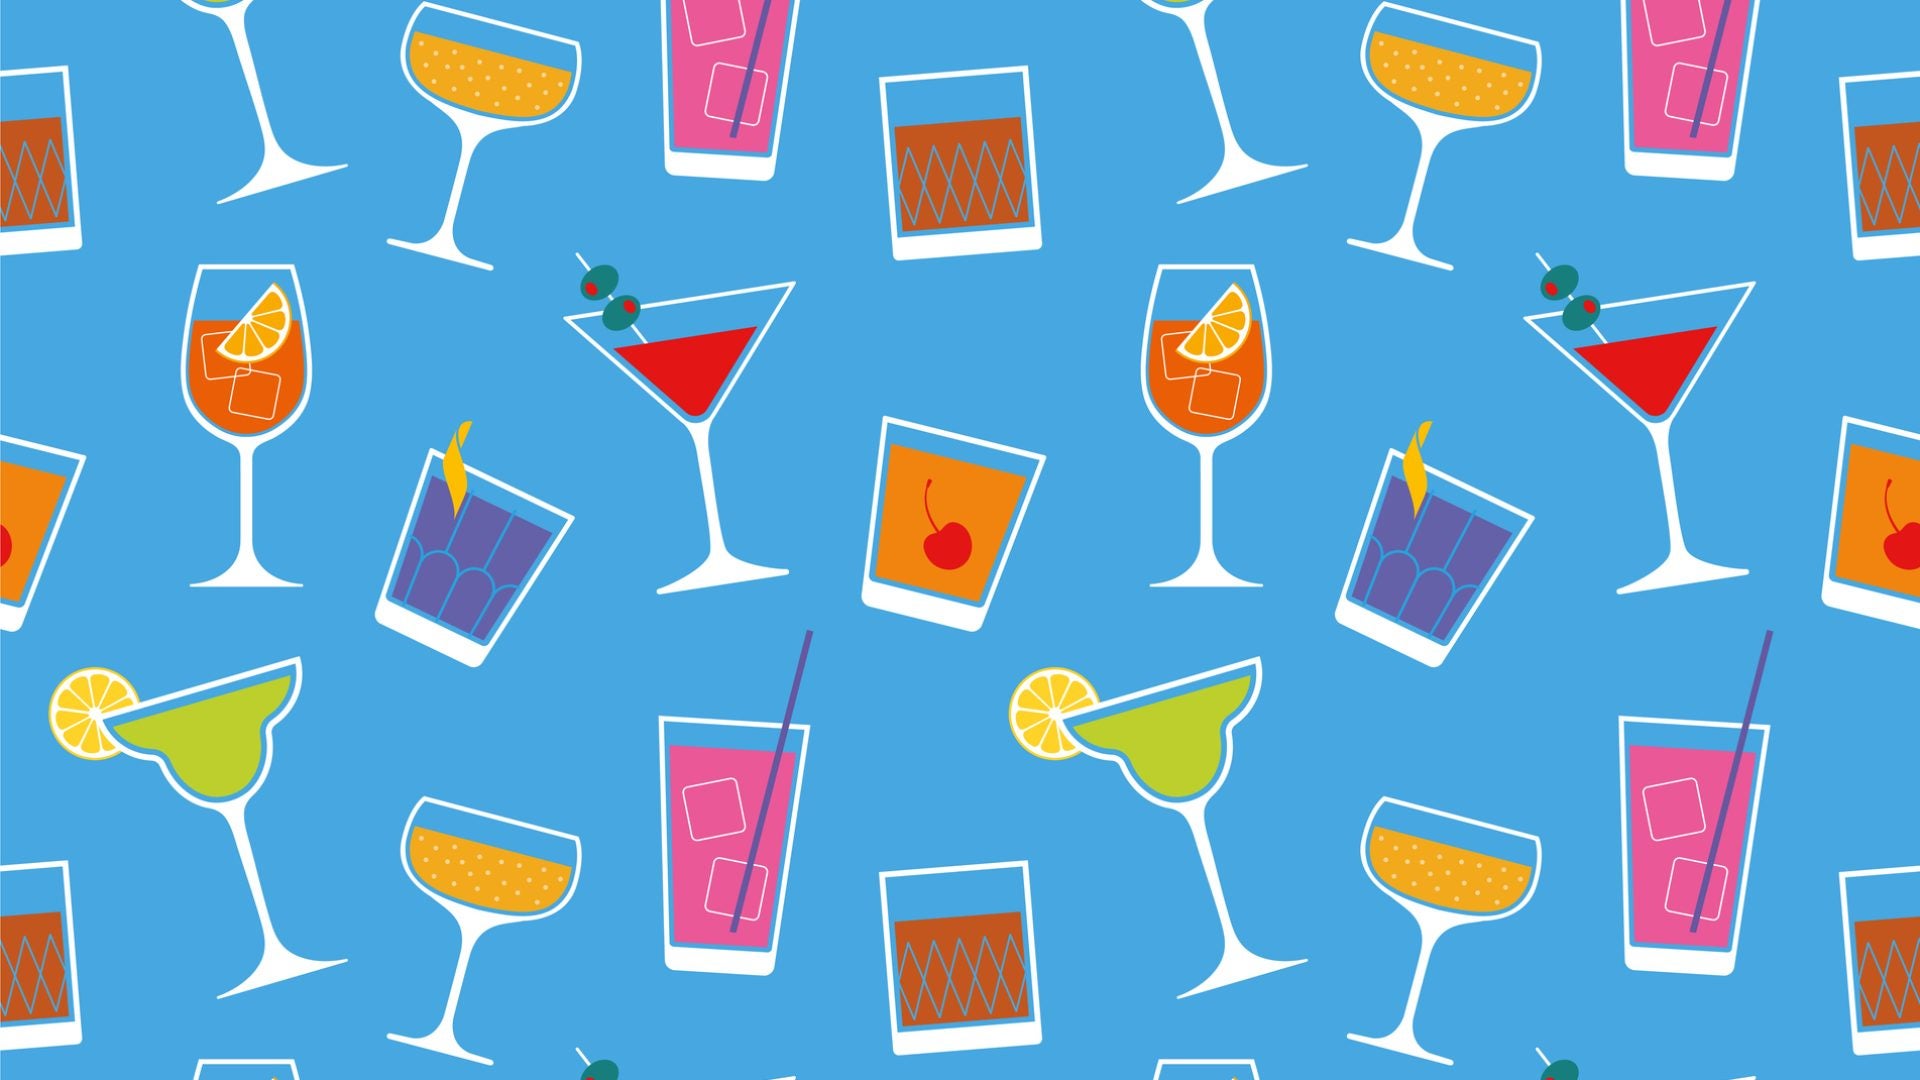 The Best Wines And Cocktails To Drink This April Based On Your Zodiac Sign